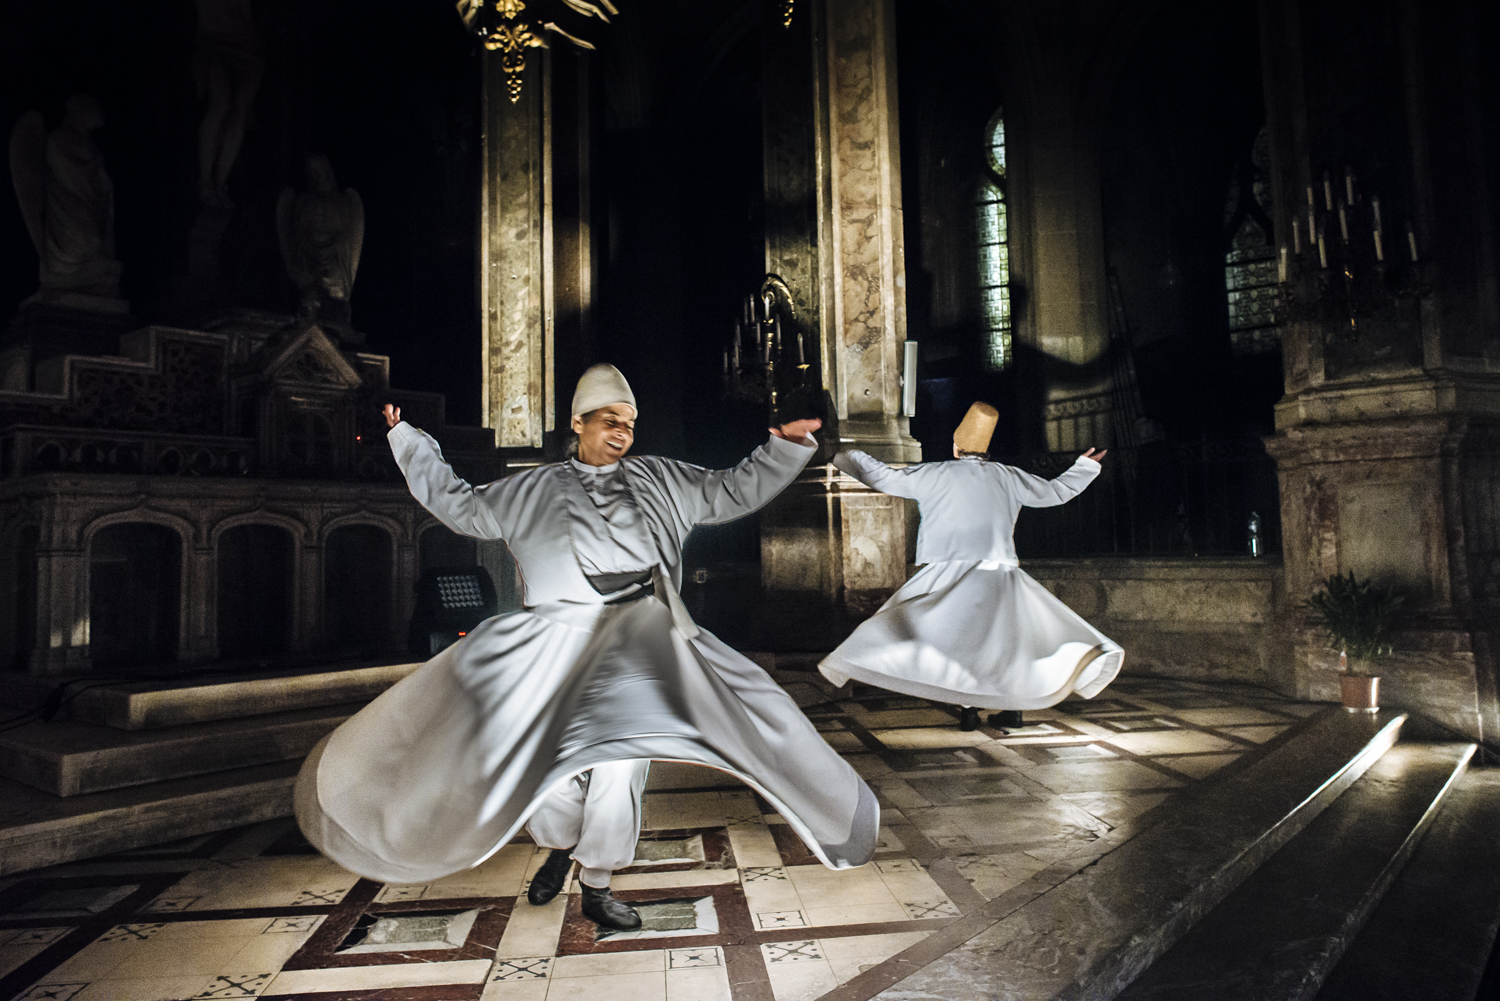 Whirling dervishes dance to the sound of Sufi songs in the Church of Saint Merry on 4 June 2017 (photo: Jan Schmidt-Whitley)